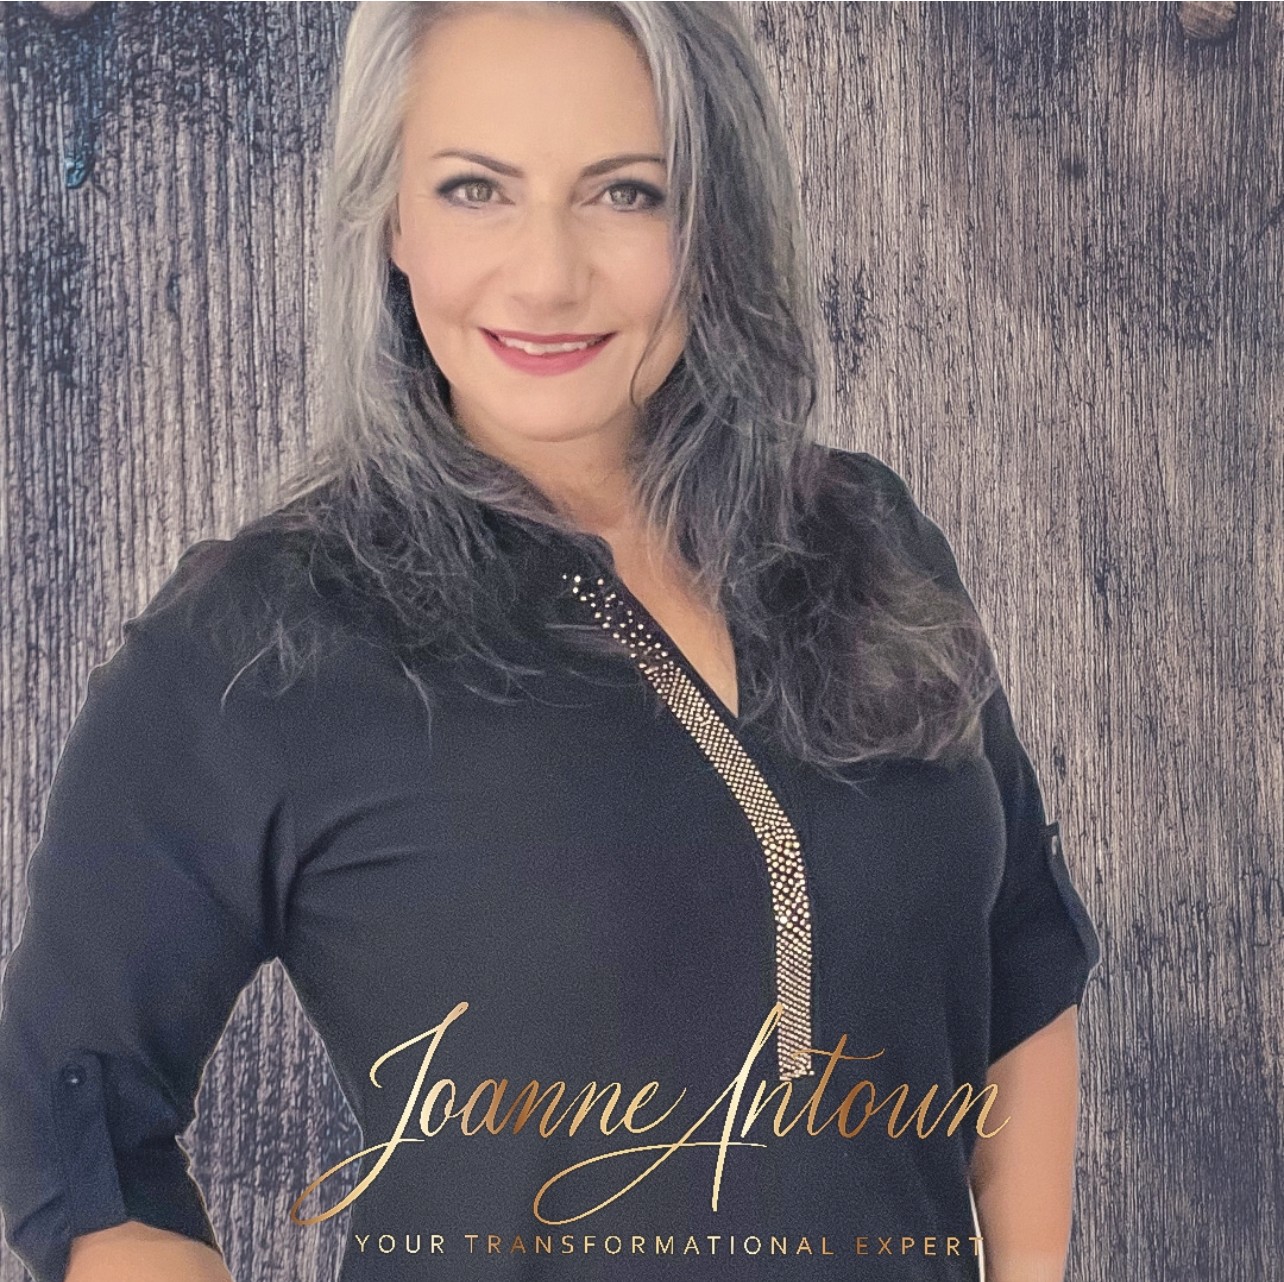 Joanne Antoun therapist on Natural Therapy Pages